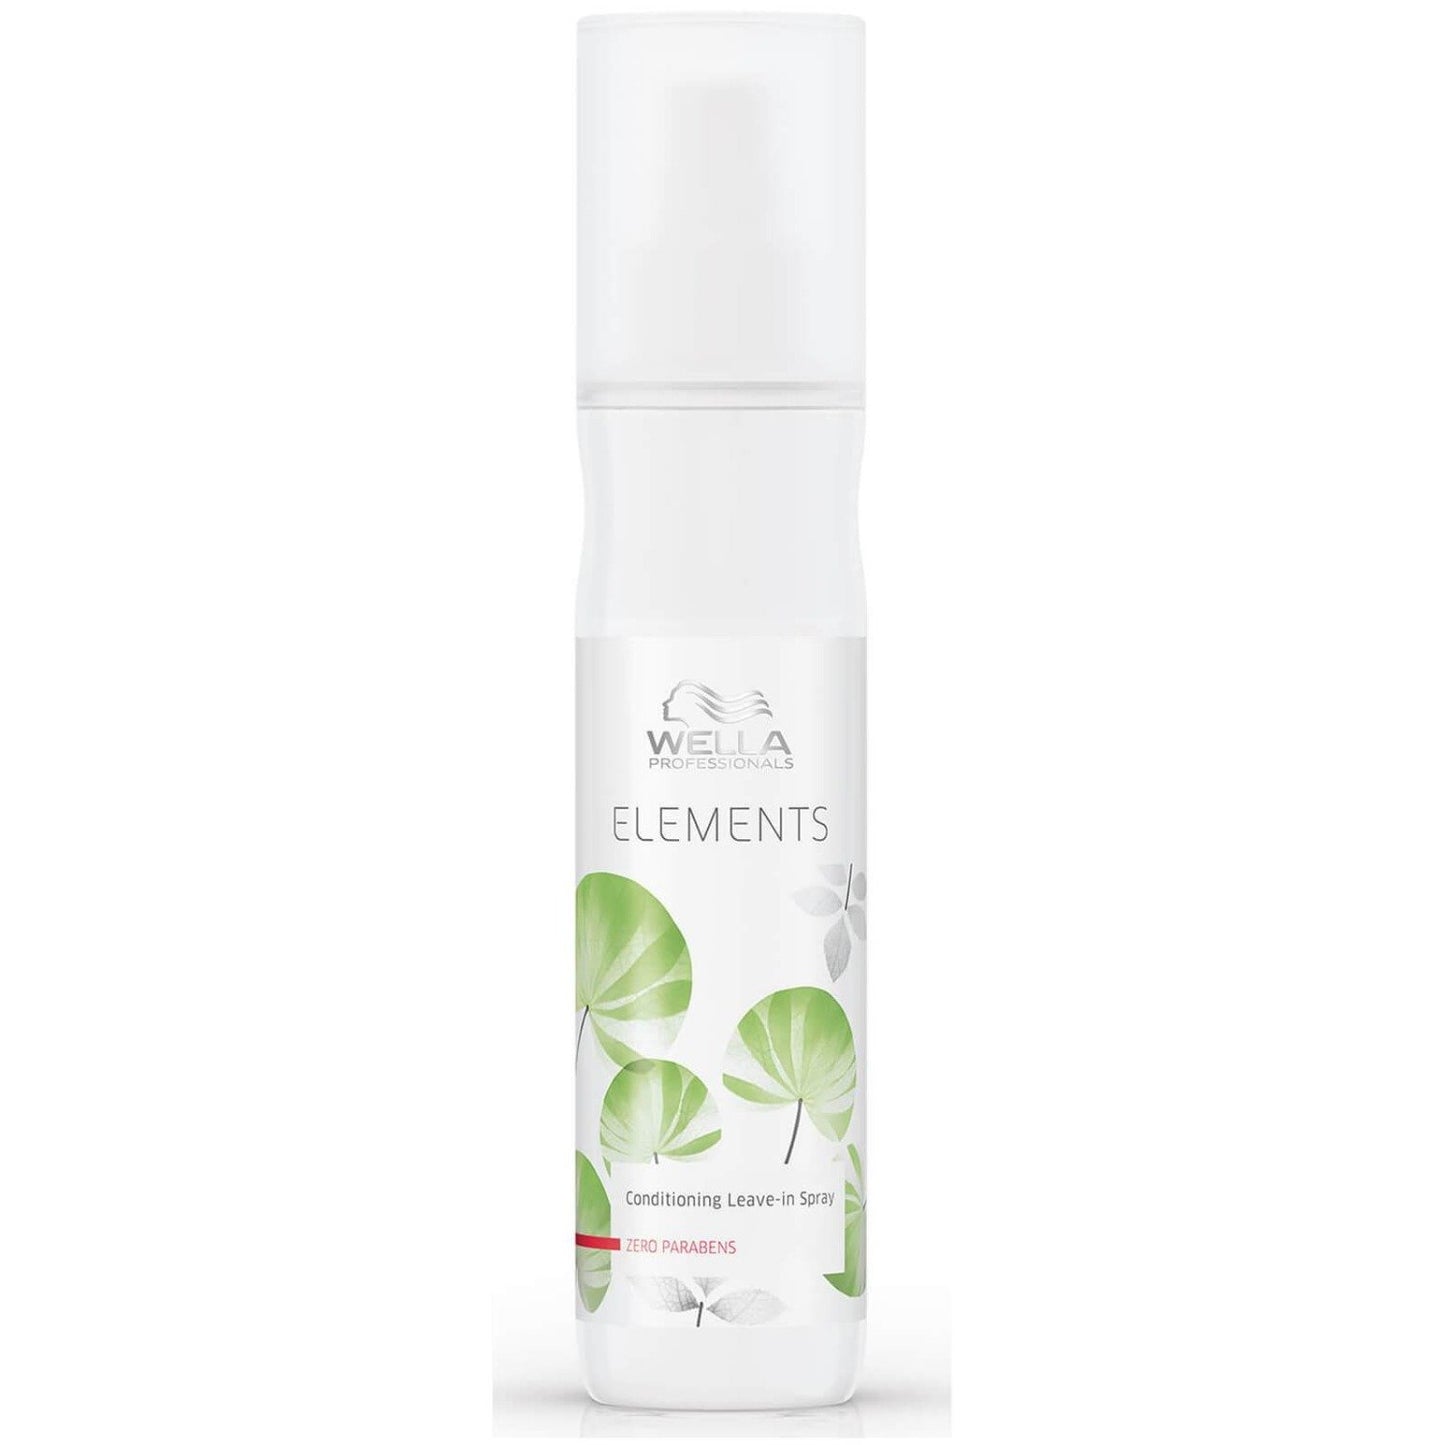 Wella Professionals Care Elements Conditioning Leave-in Spray 150ml (SHOP)